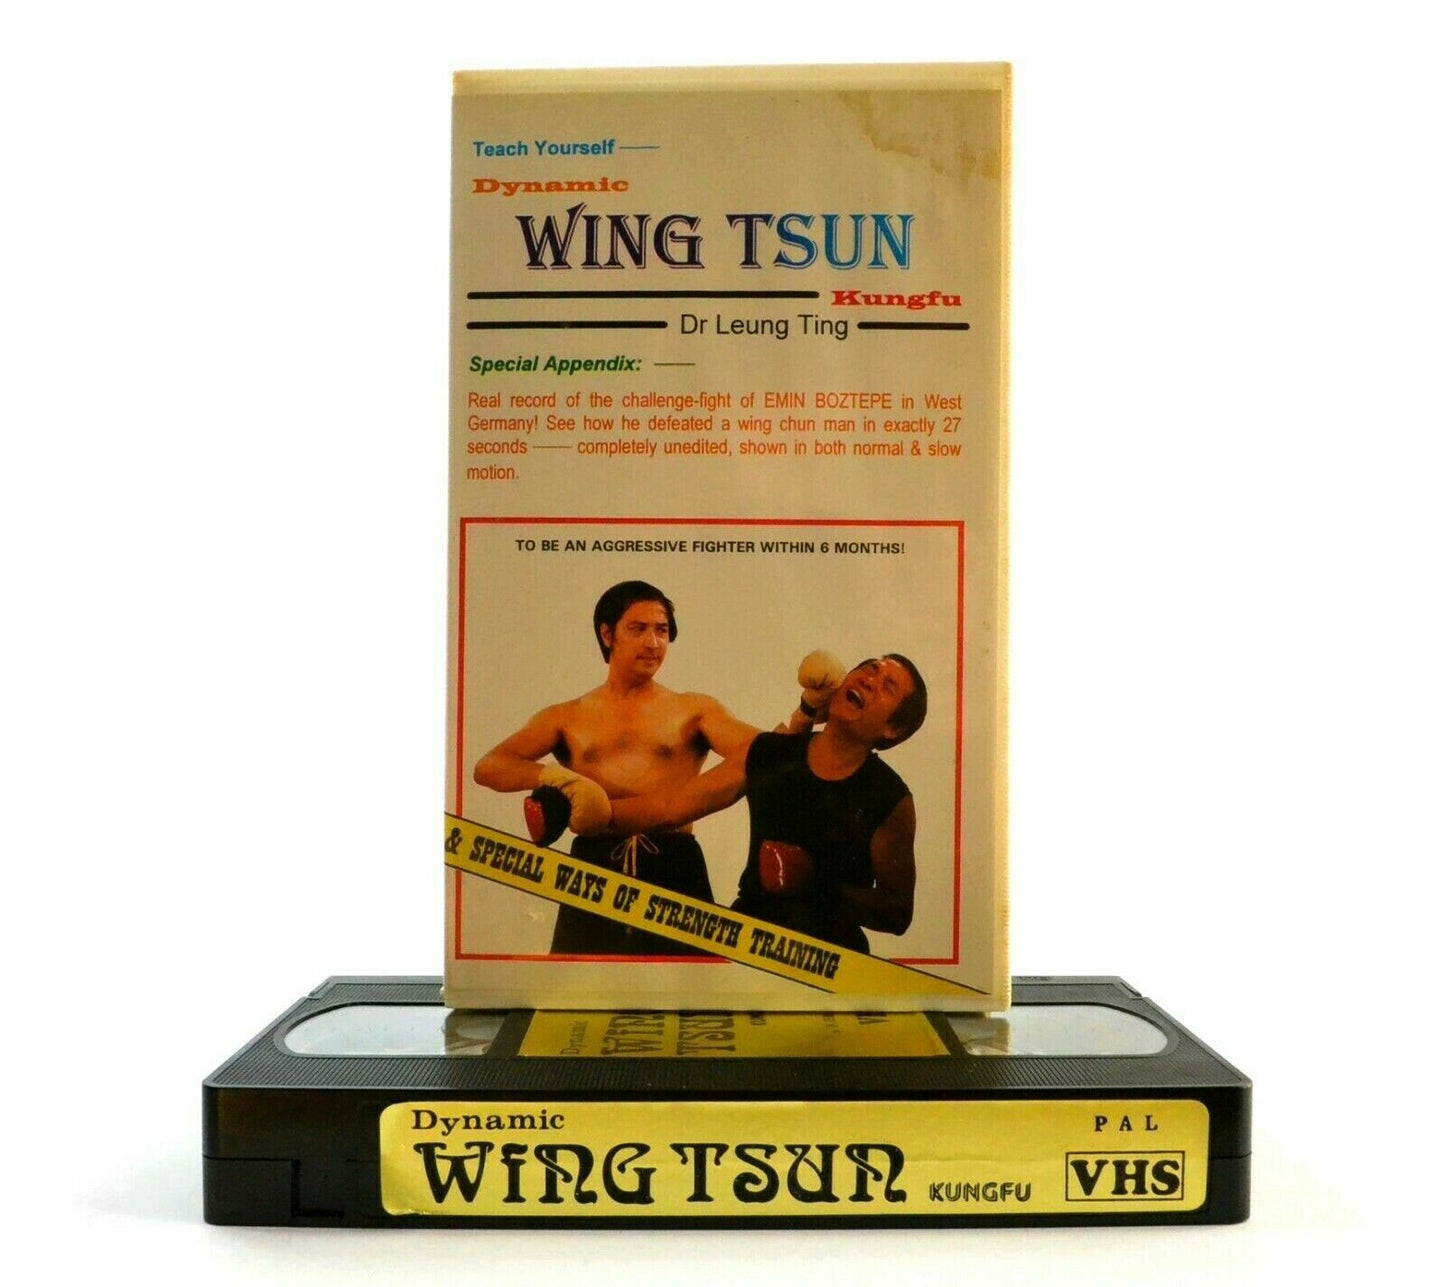 Dynamic Wing Tsun Kungfu: By Dr.Leung Ting - Special Ways Of Training - Pal VHS-